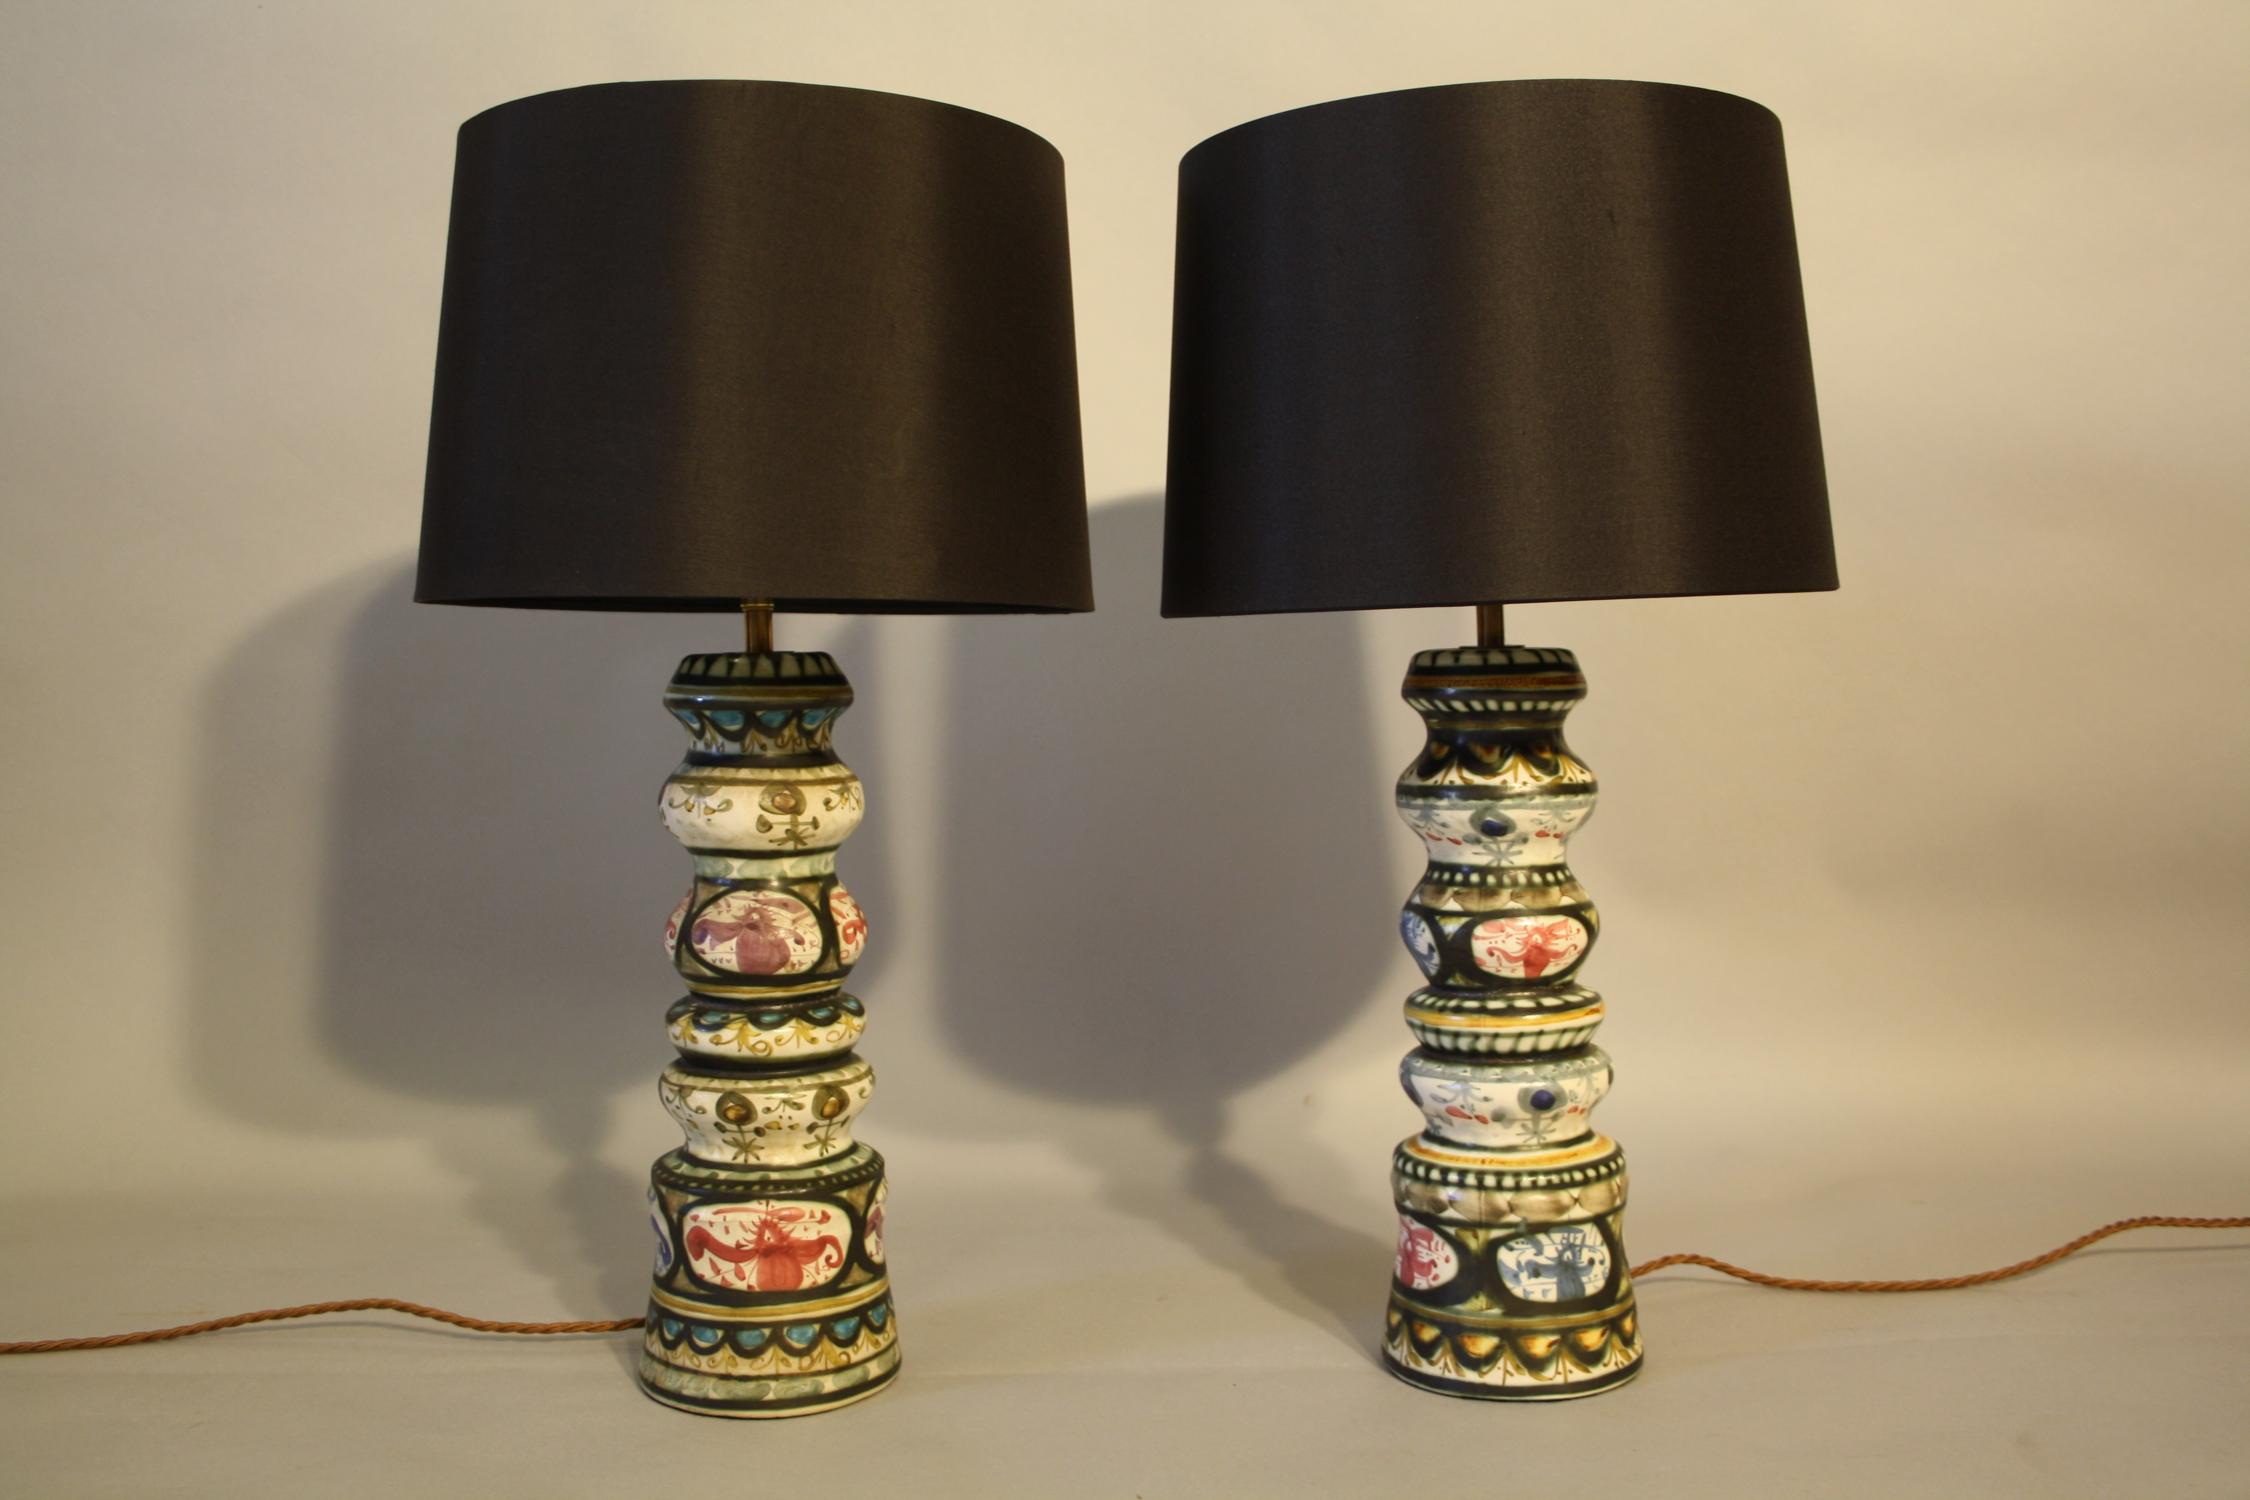 A pair of folksy painted ceramic table lamps